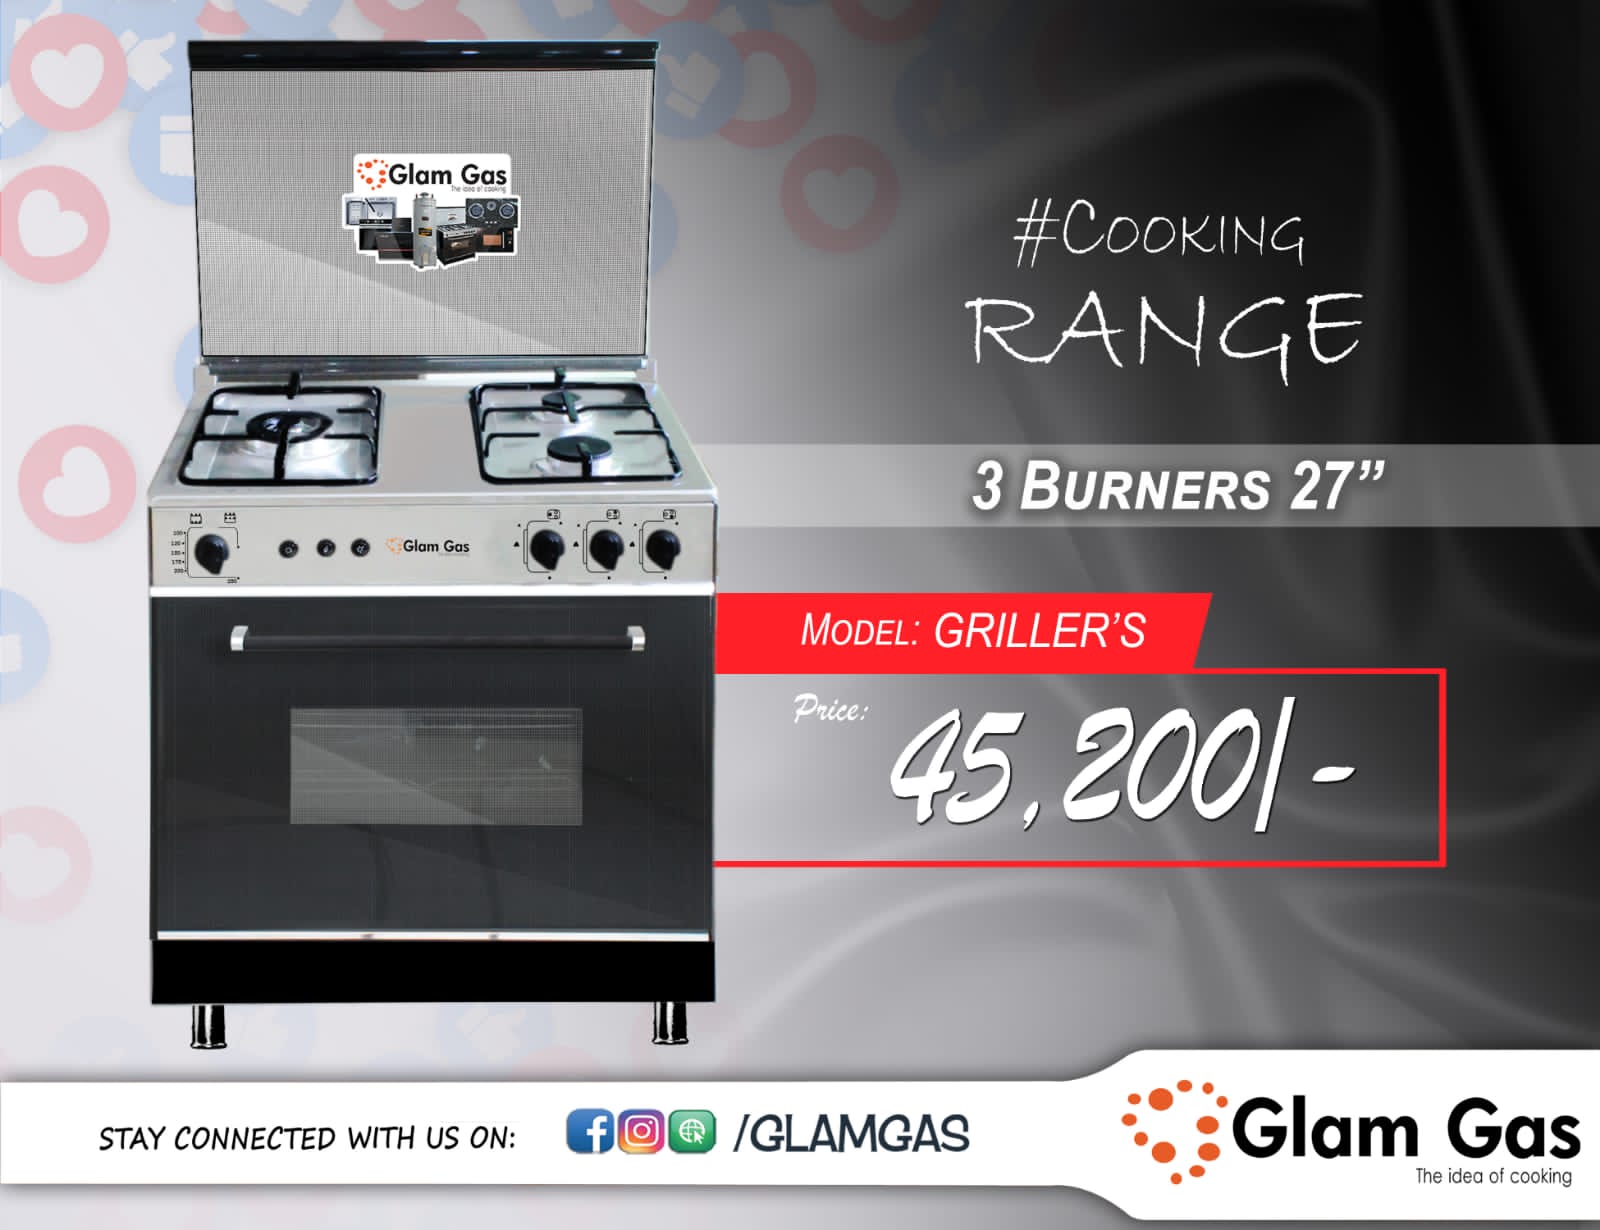 Glam Gas	Cooking Range Grillers 27